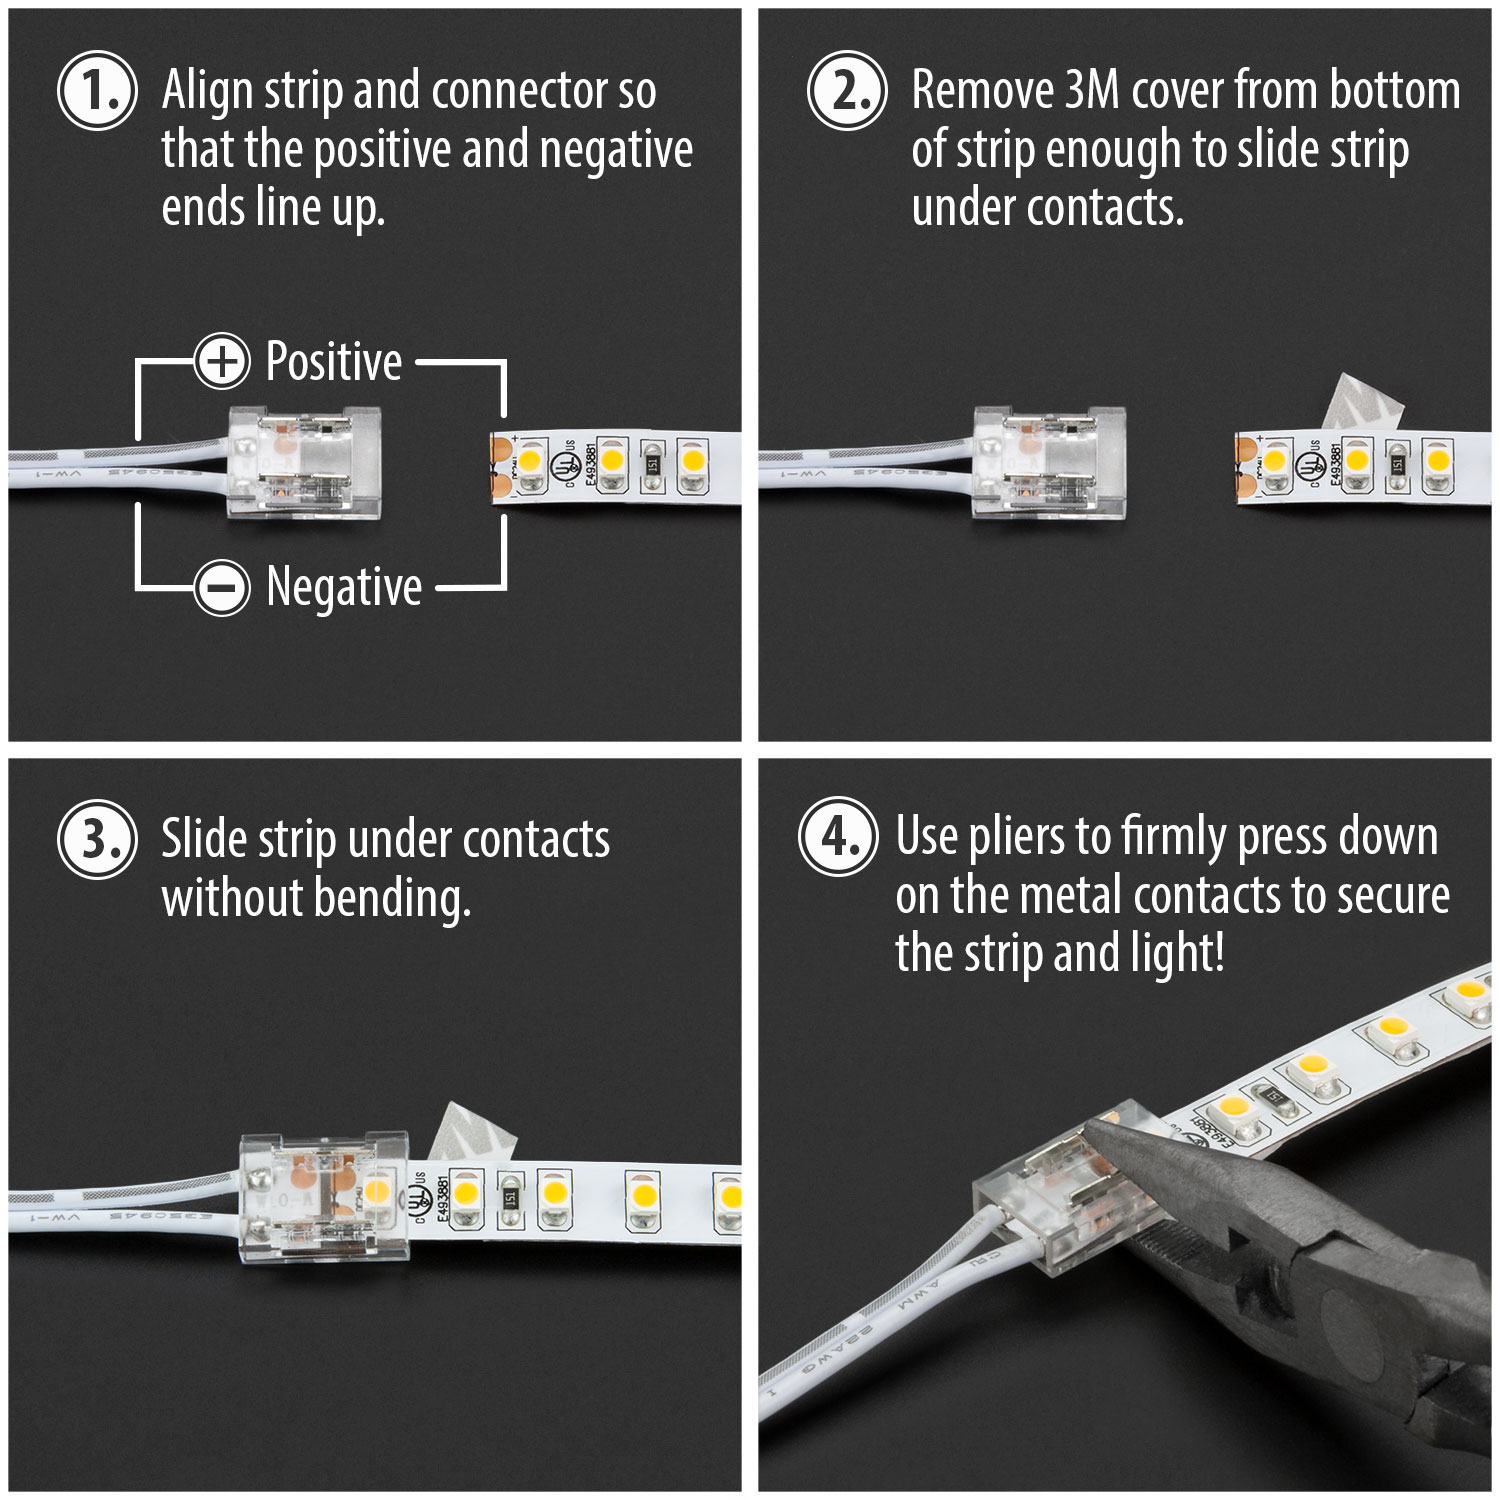 https://solidapollo.com/images/Clampdown-LED-Strip-Connector-Diagram.jpg